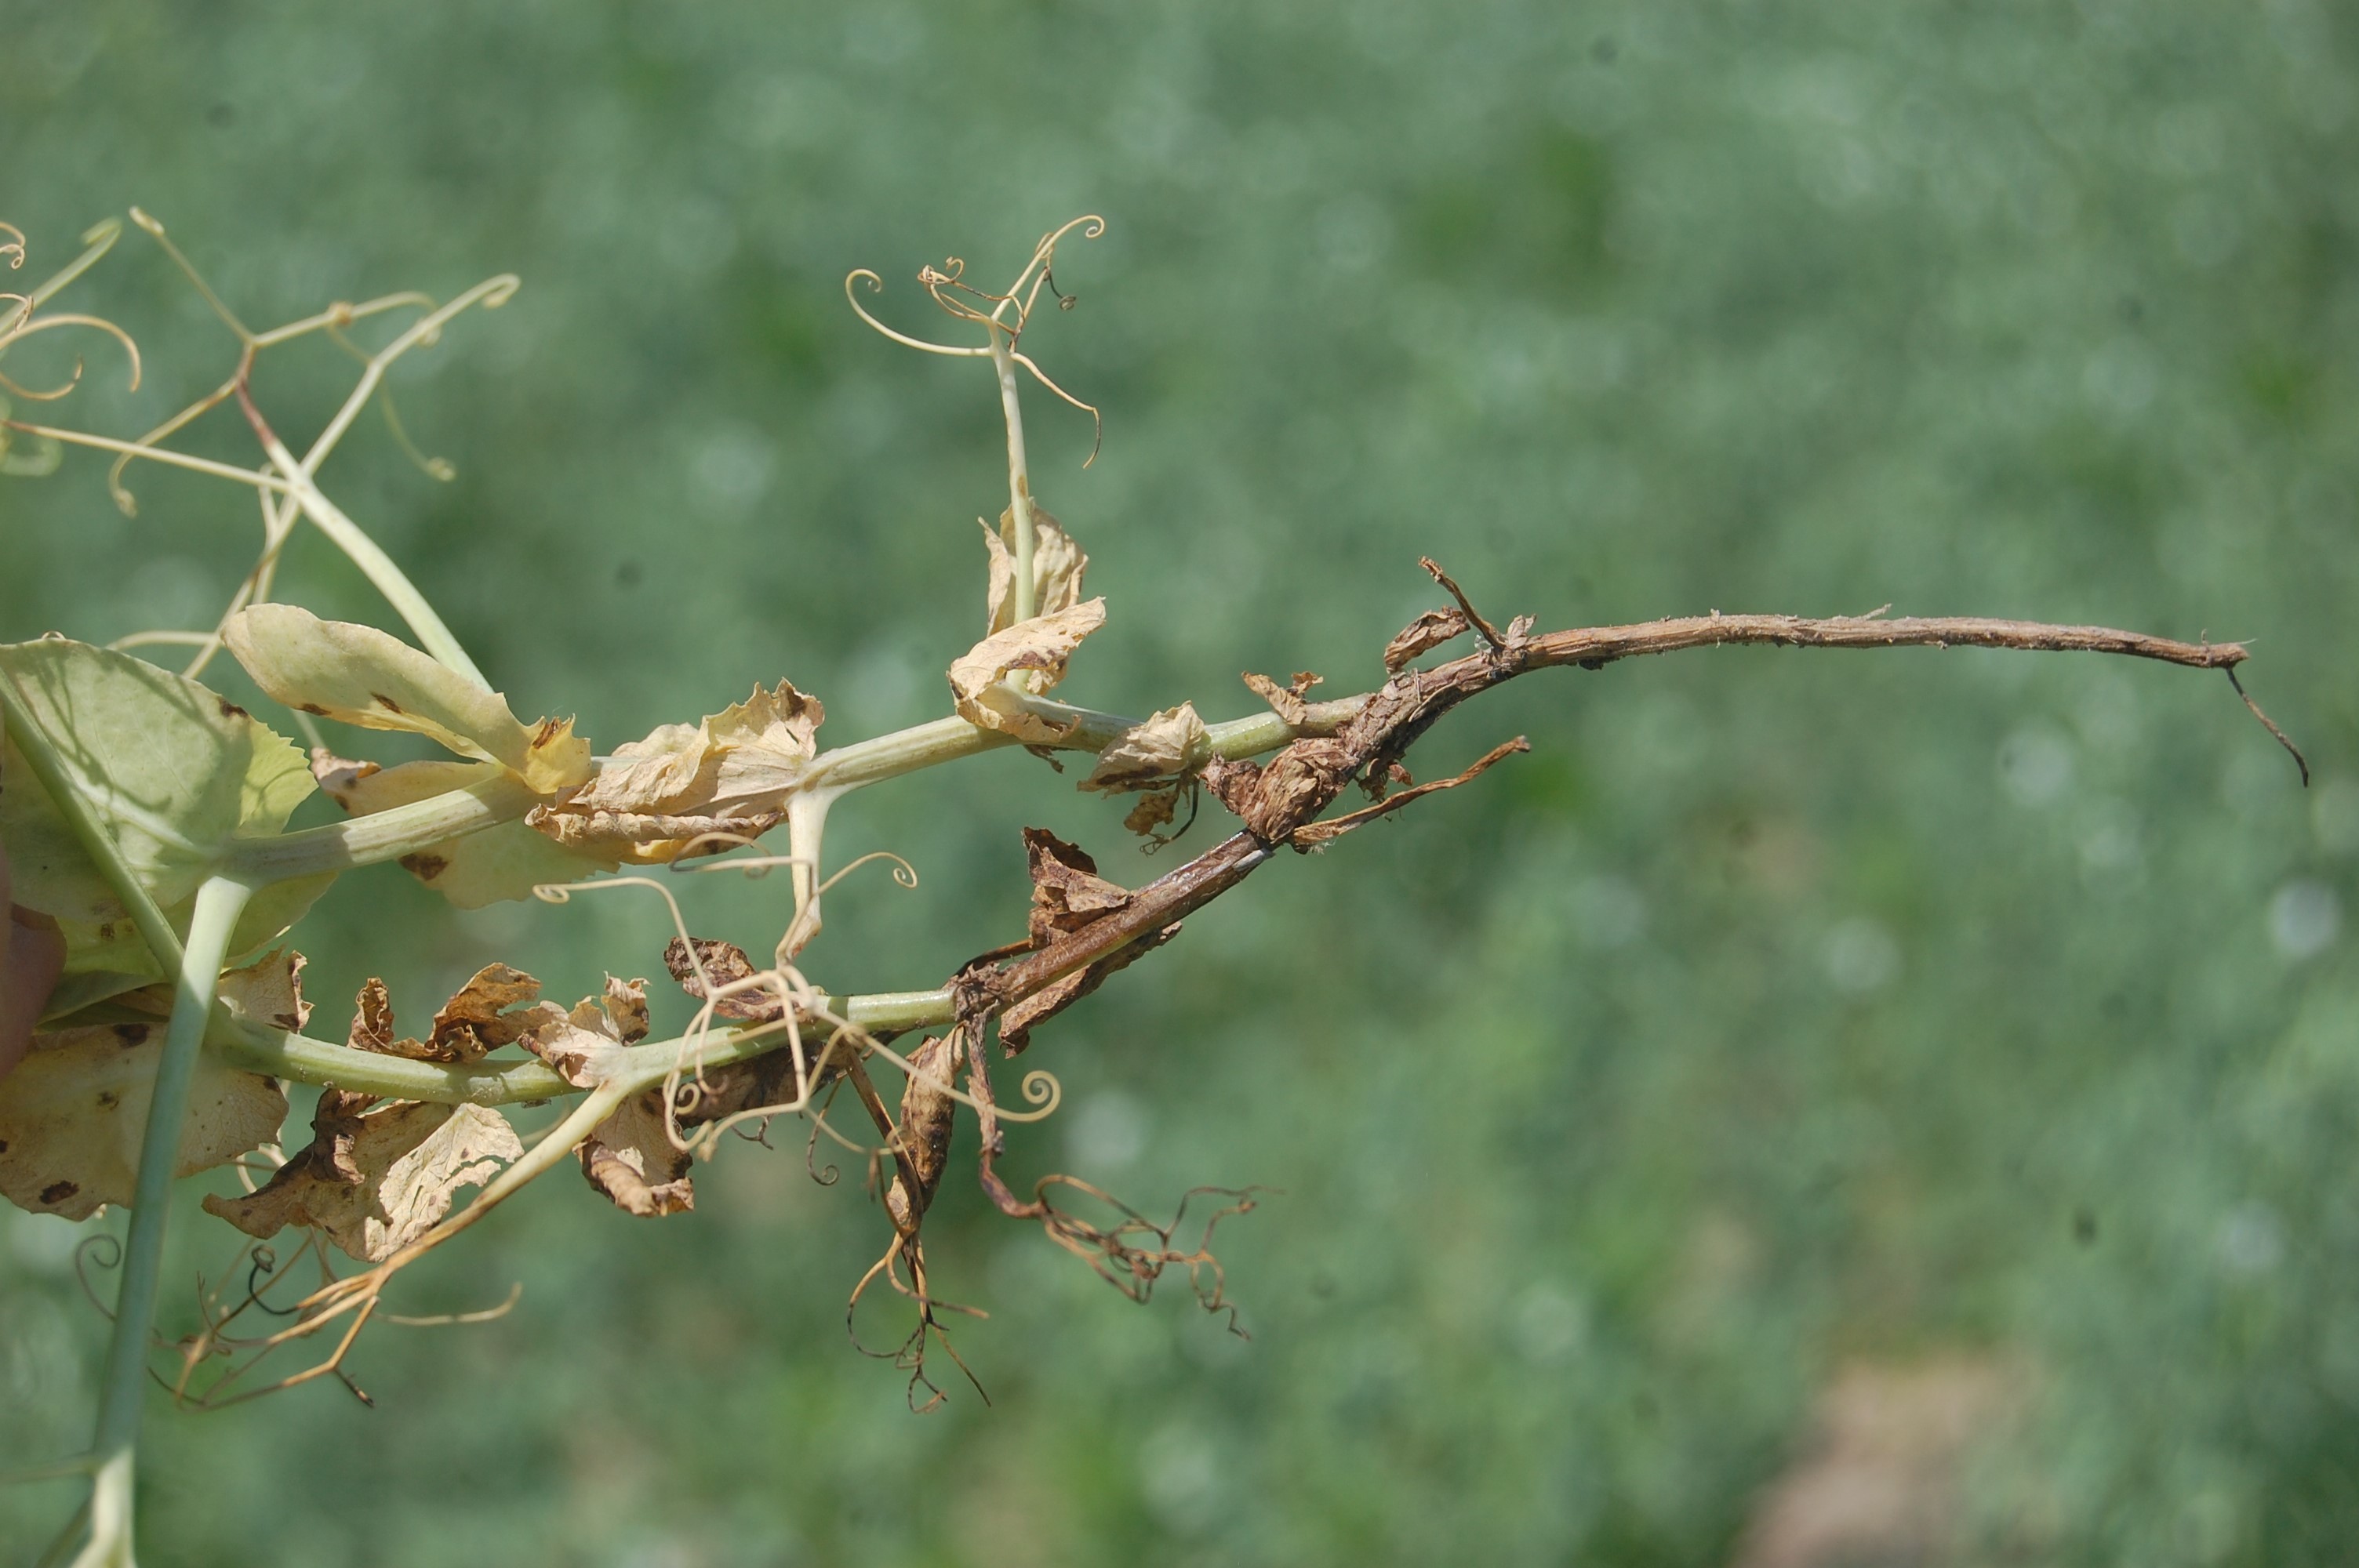 dry pea stem infection